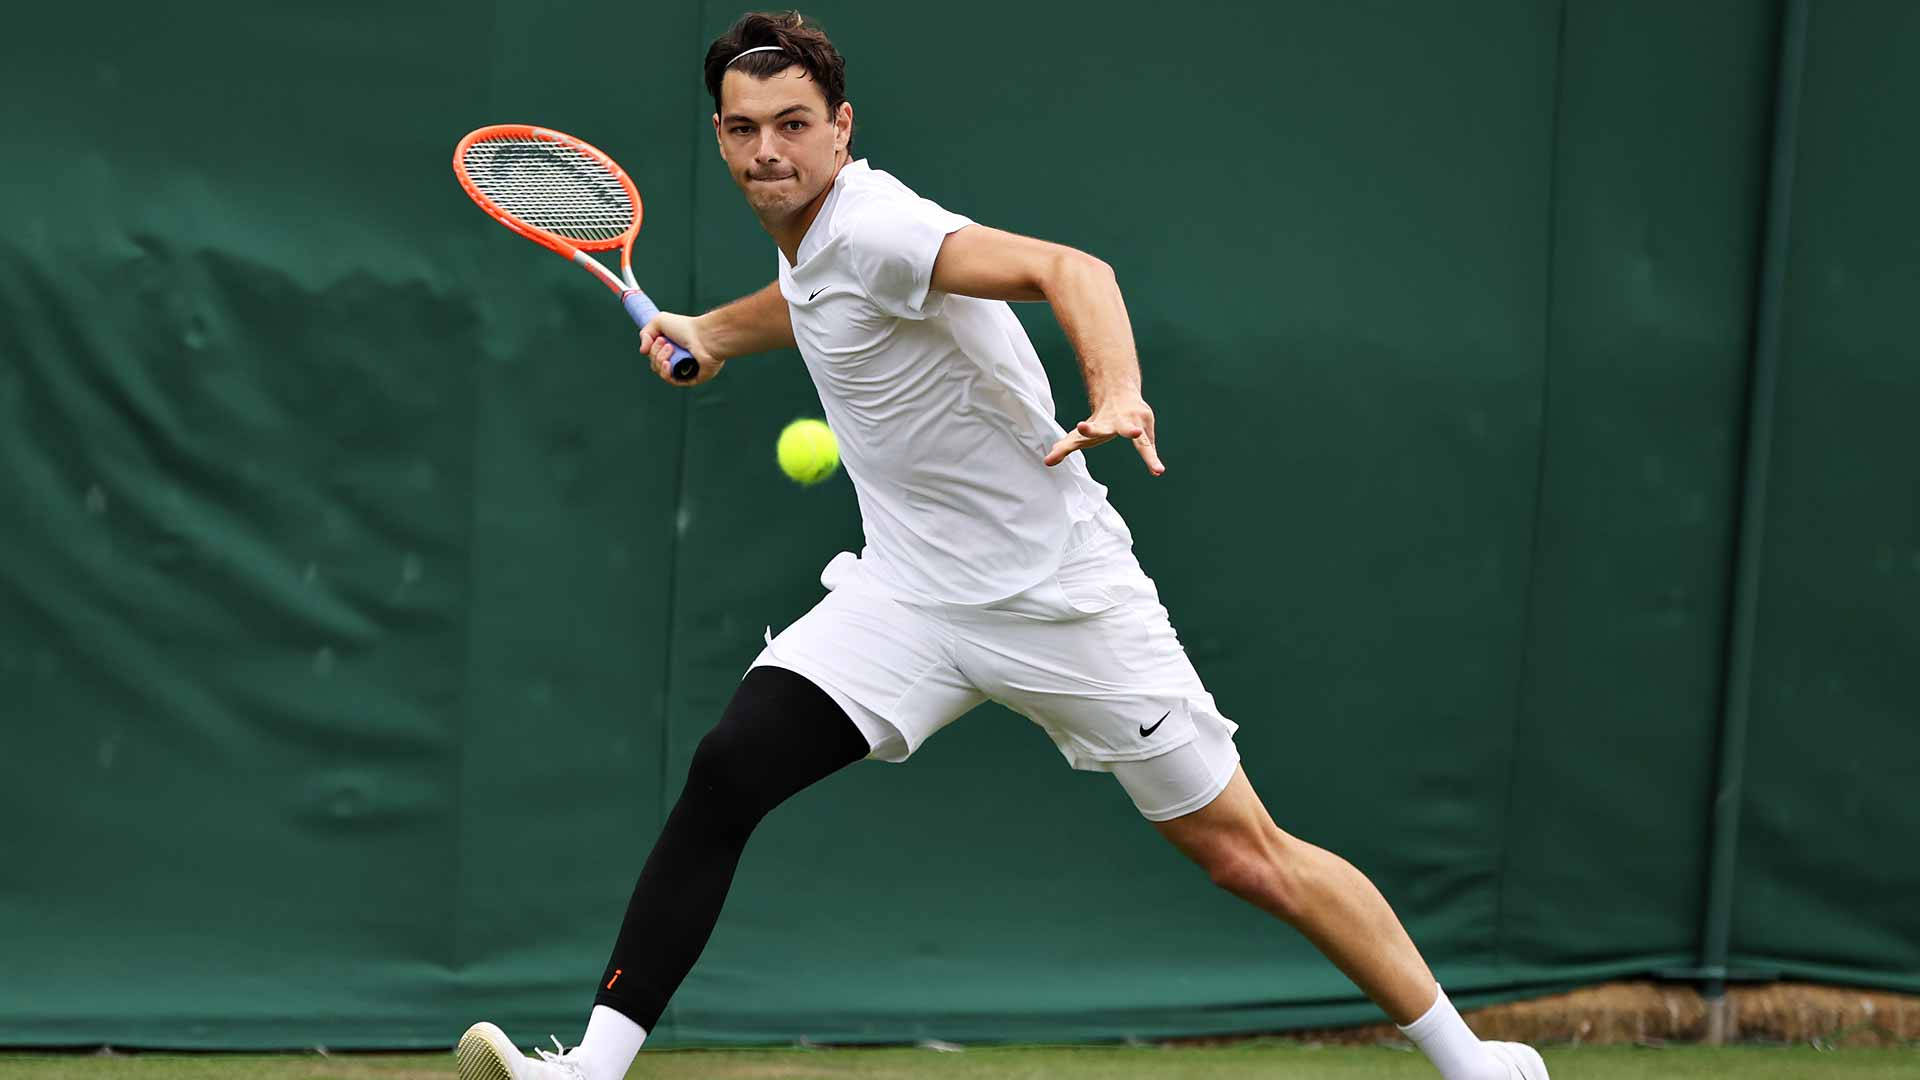 Taylor Fritz Performing Forehand Shot in Tennis Wallpaper